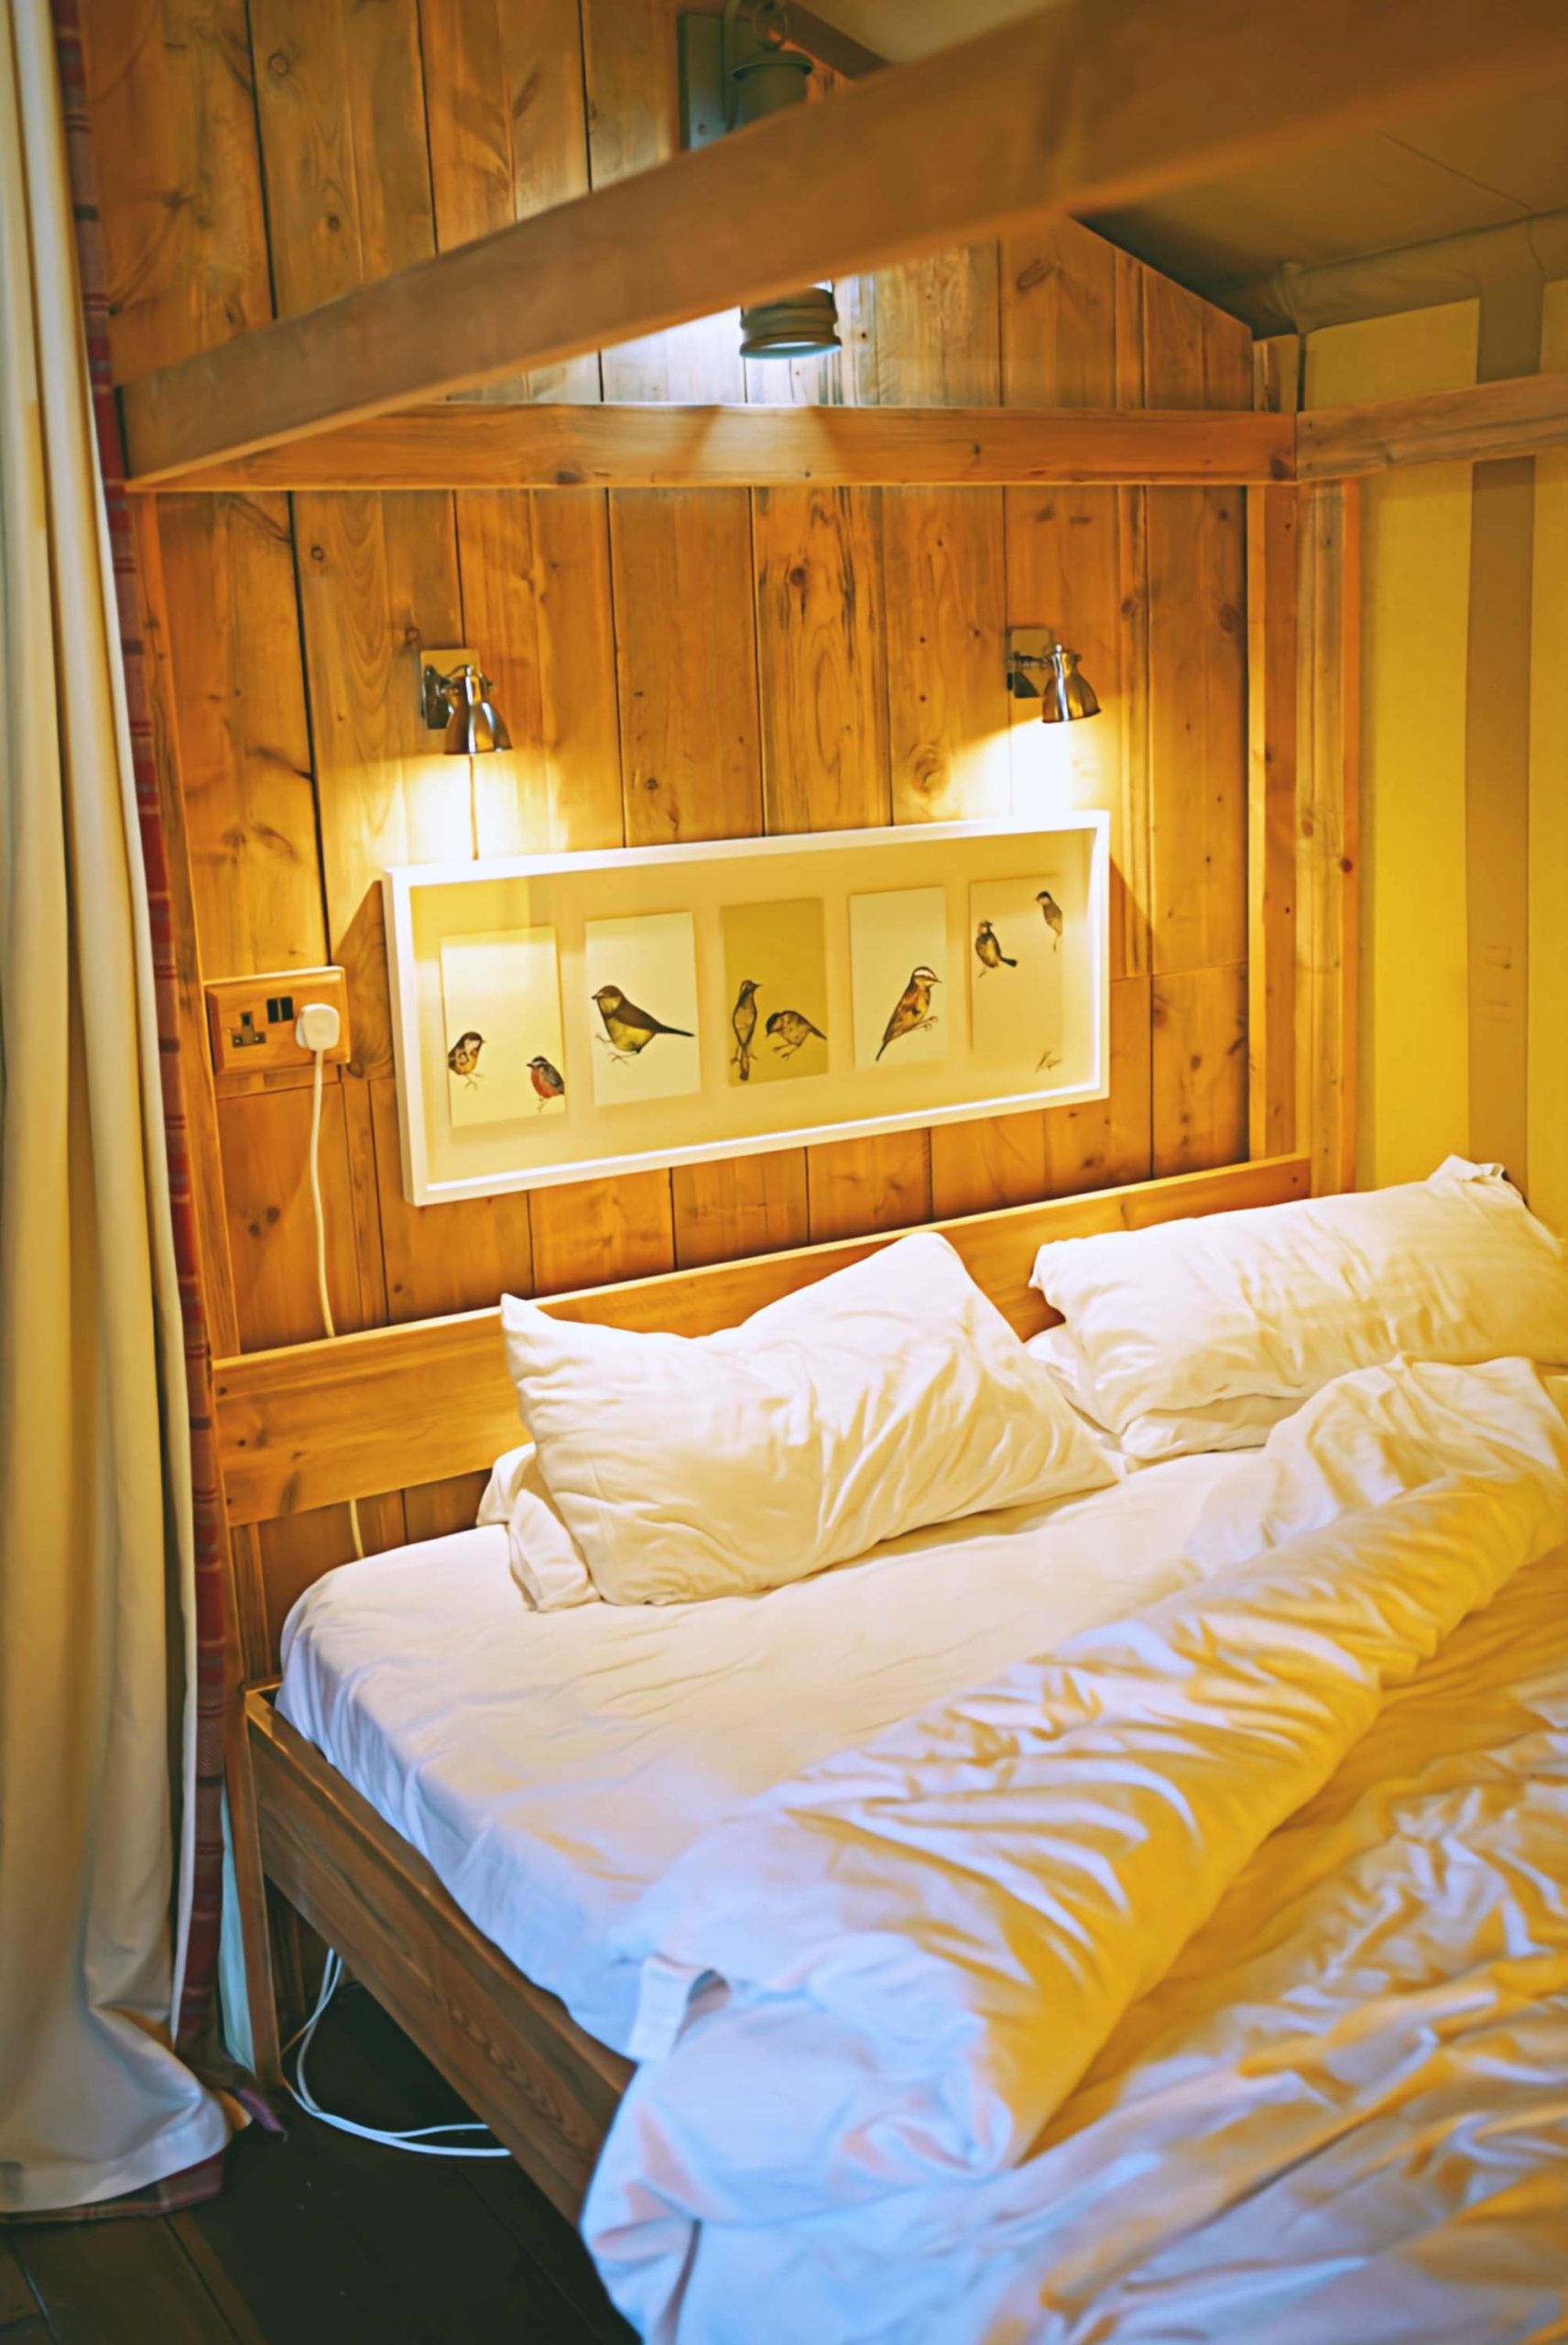 The king-size four poster bed in the main bedroom inside one of the Lodges at Loose Reins